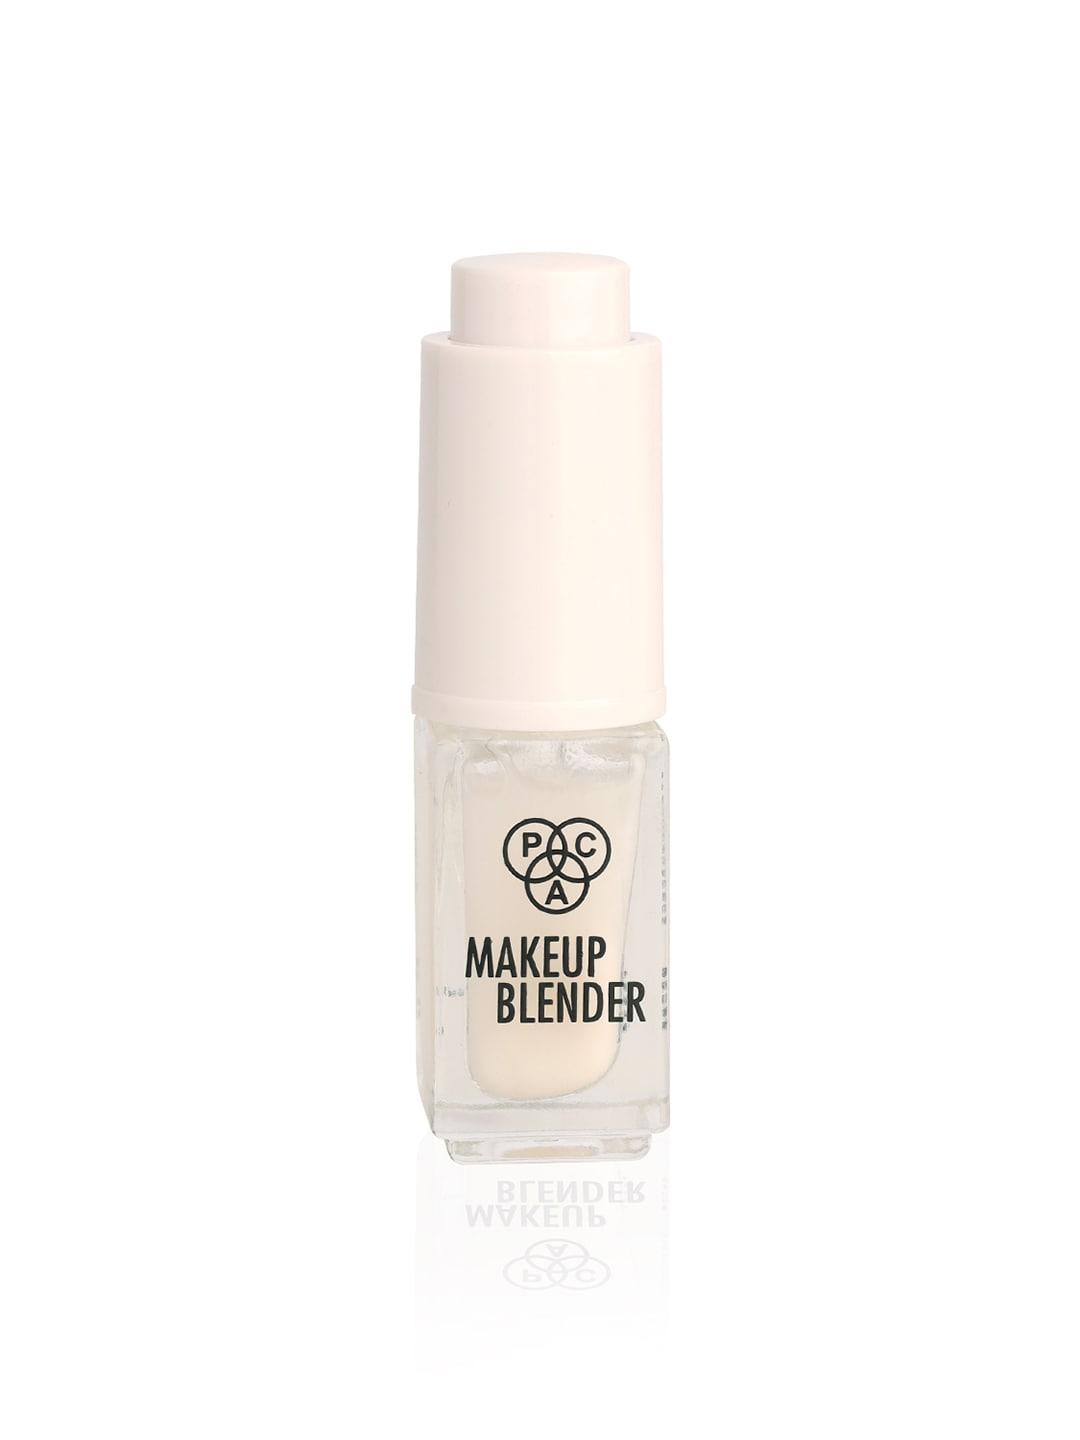 pac makeup blender mini - revives dehydrated cream/liquid products - 2.5ml